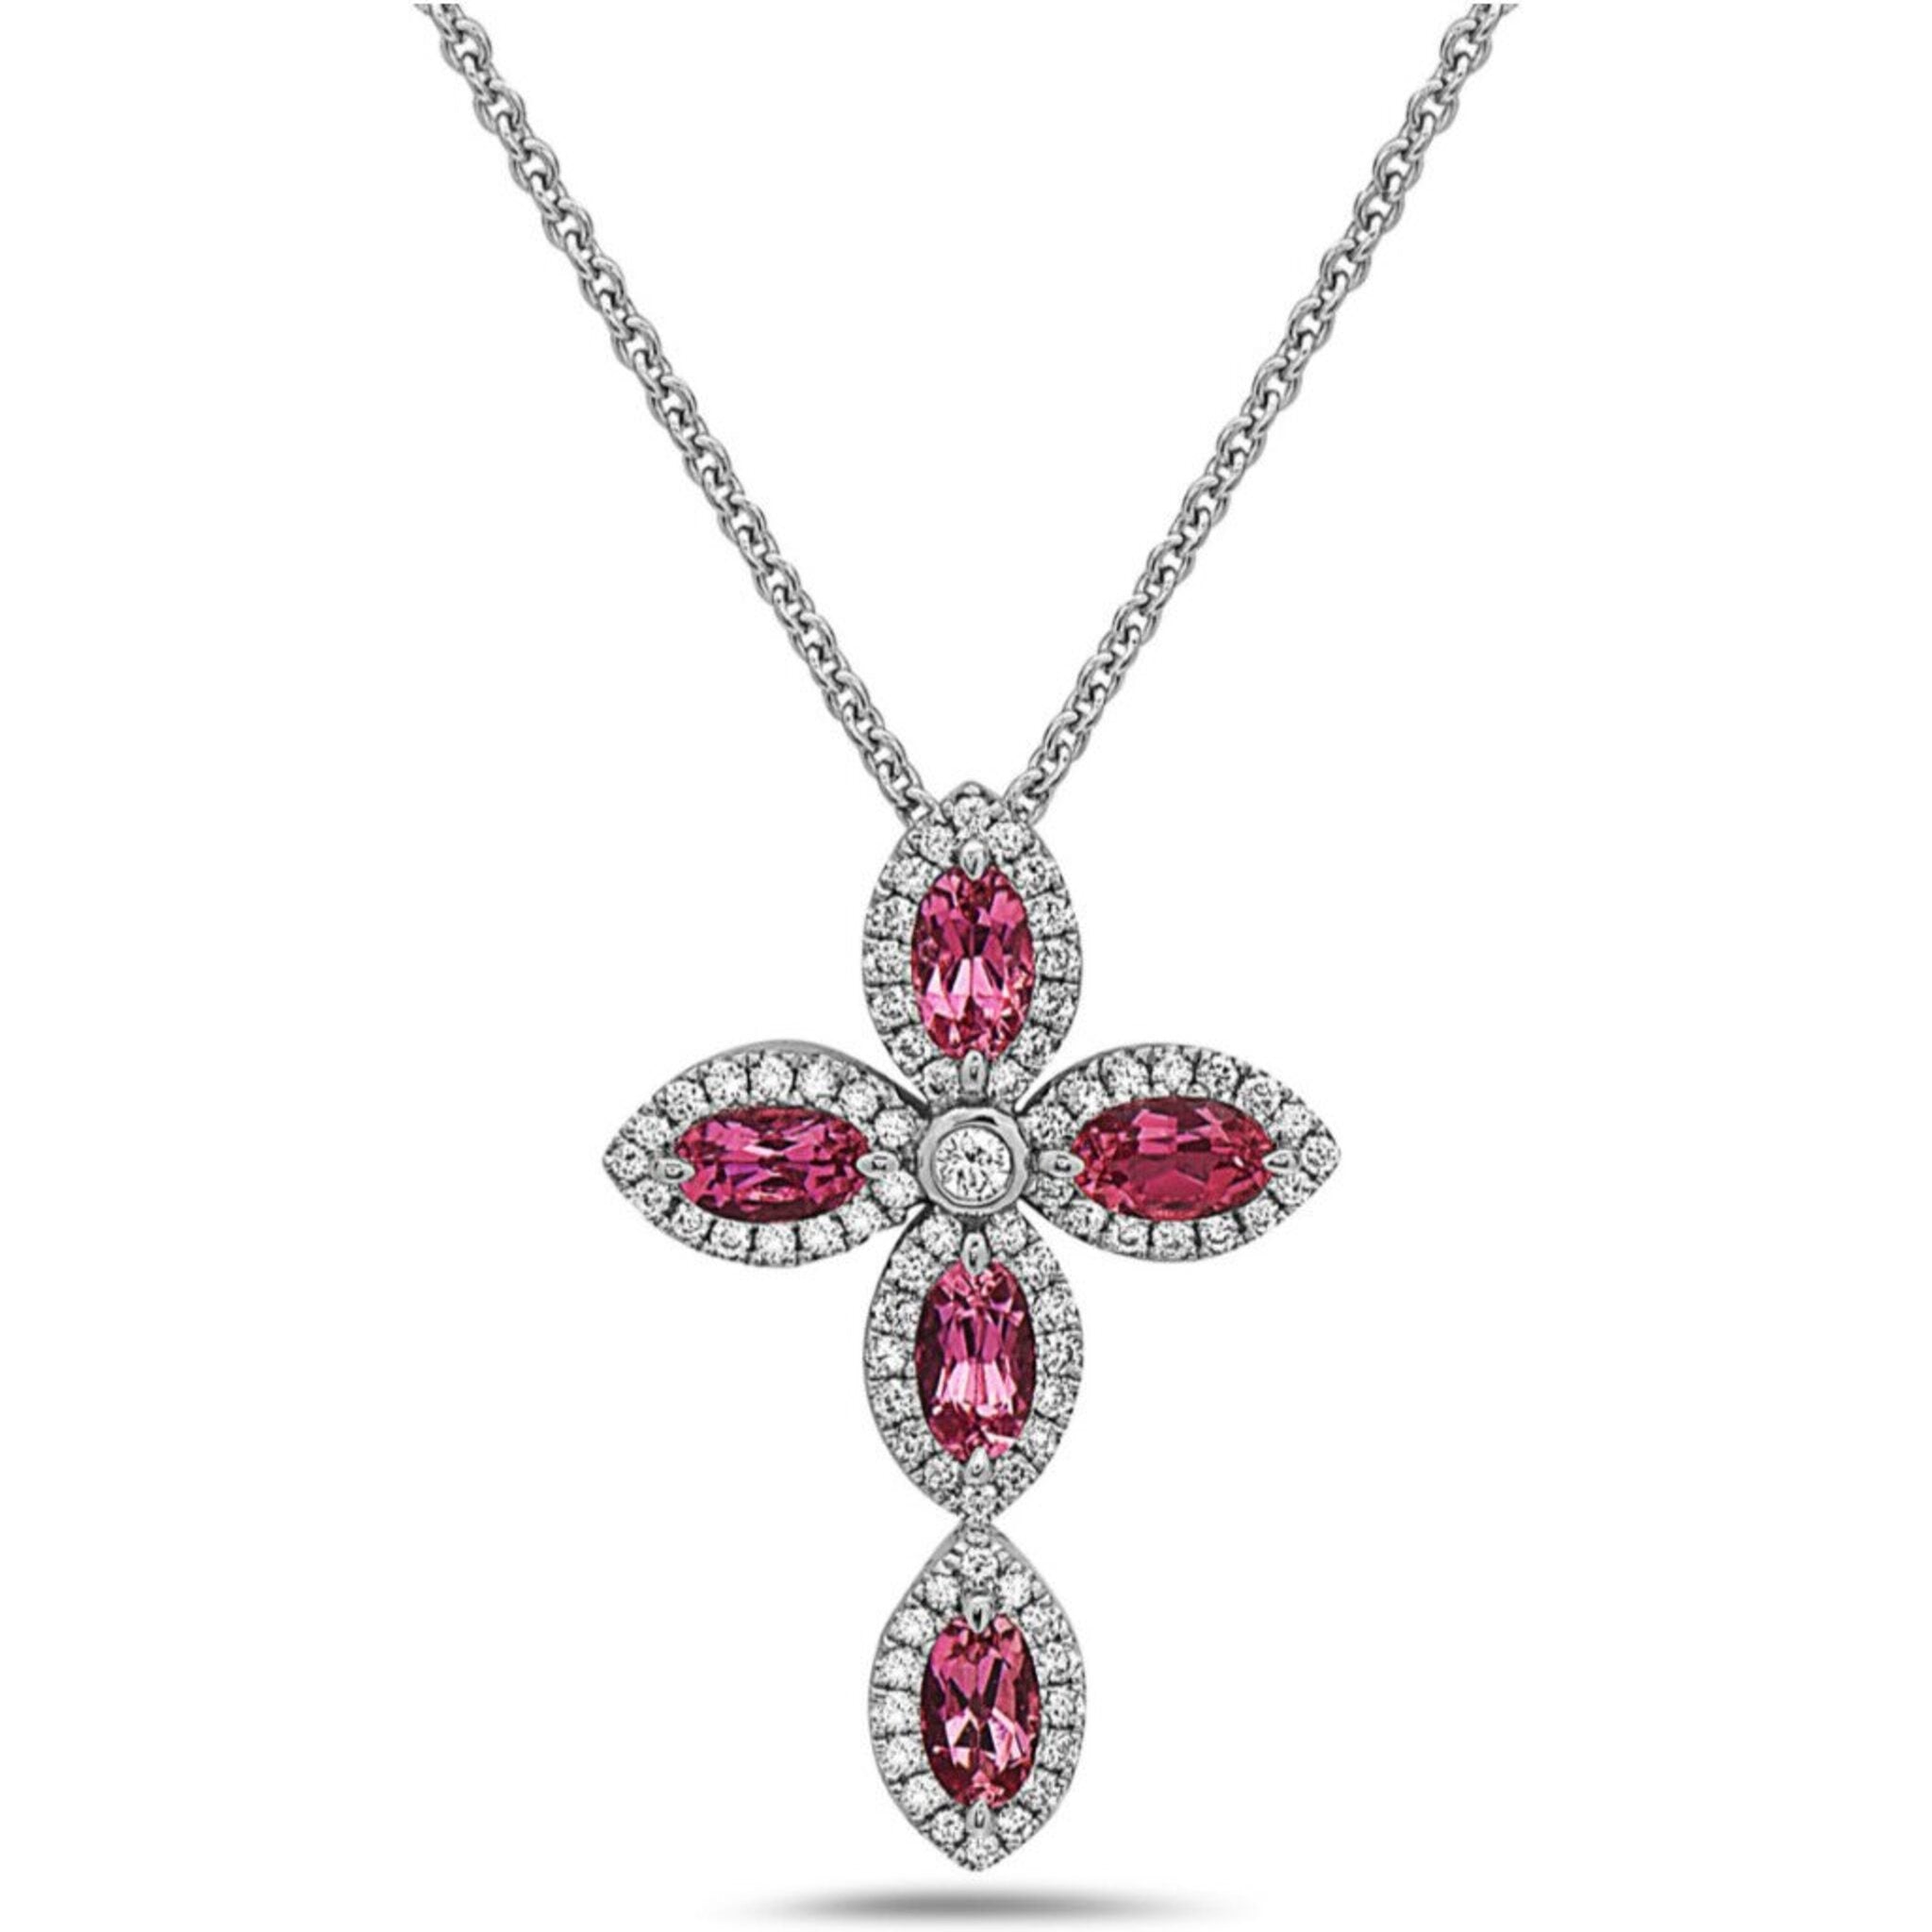 Charles Krypell - Pastel Diamond Firefly Marquise Cross Necklace - Rubellite